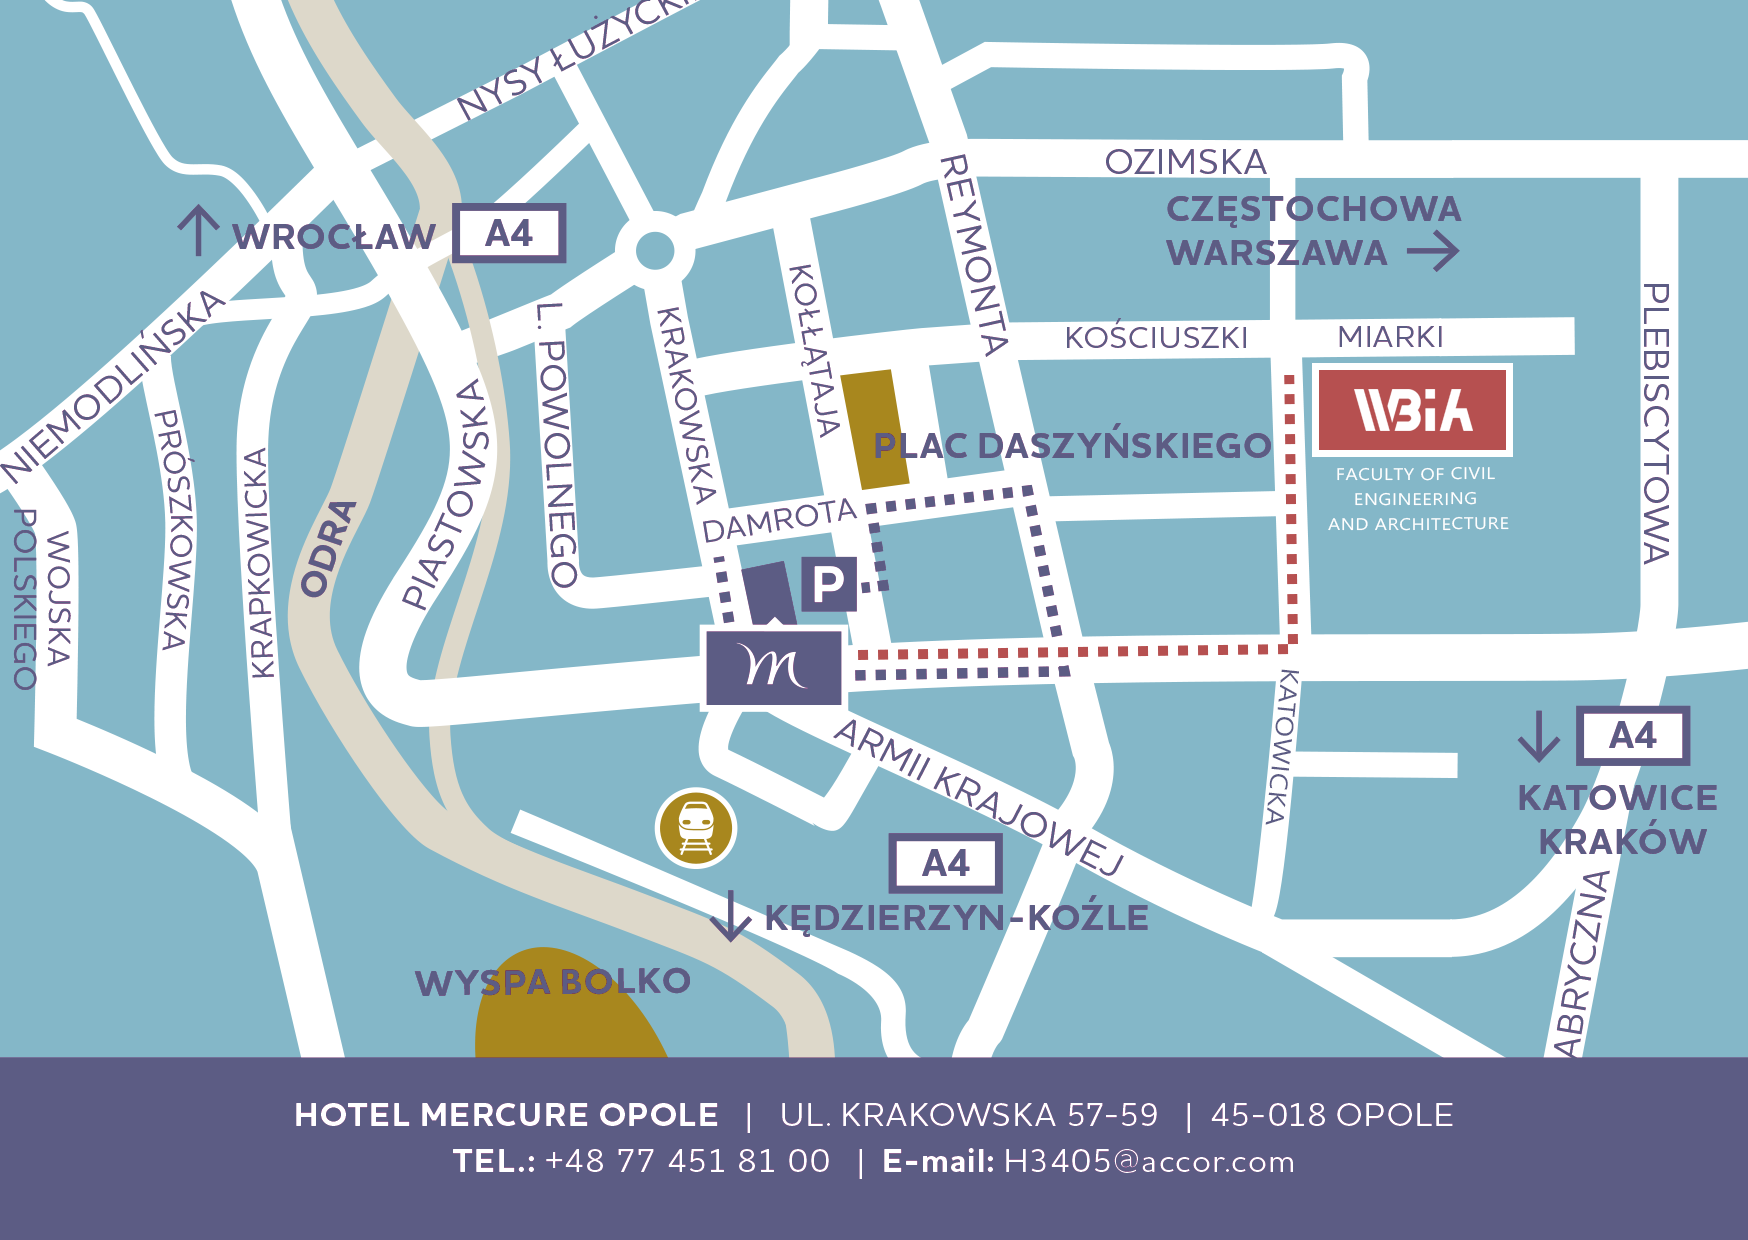 The map showing the route between the Mercury hotel and the Faculty of Civil Engineering and Architecture, Opole University of Technology